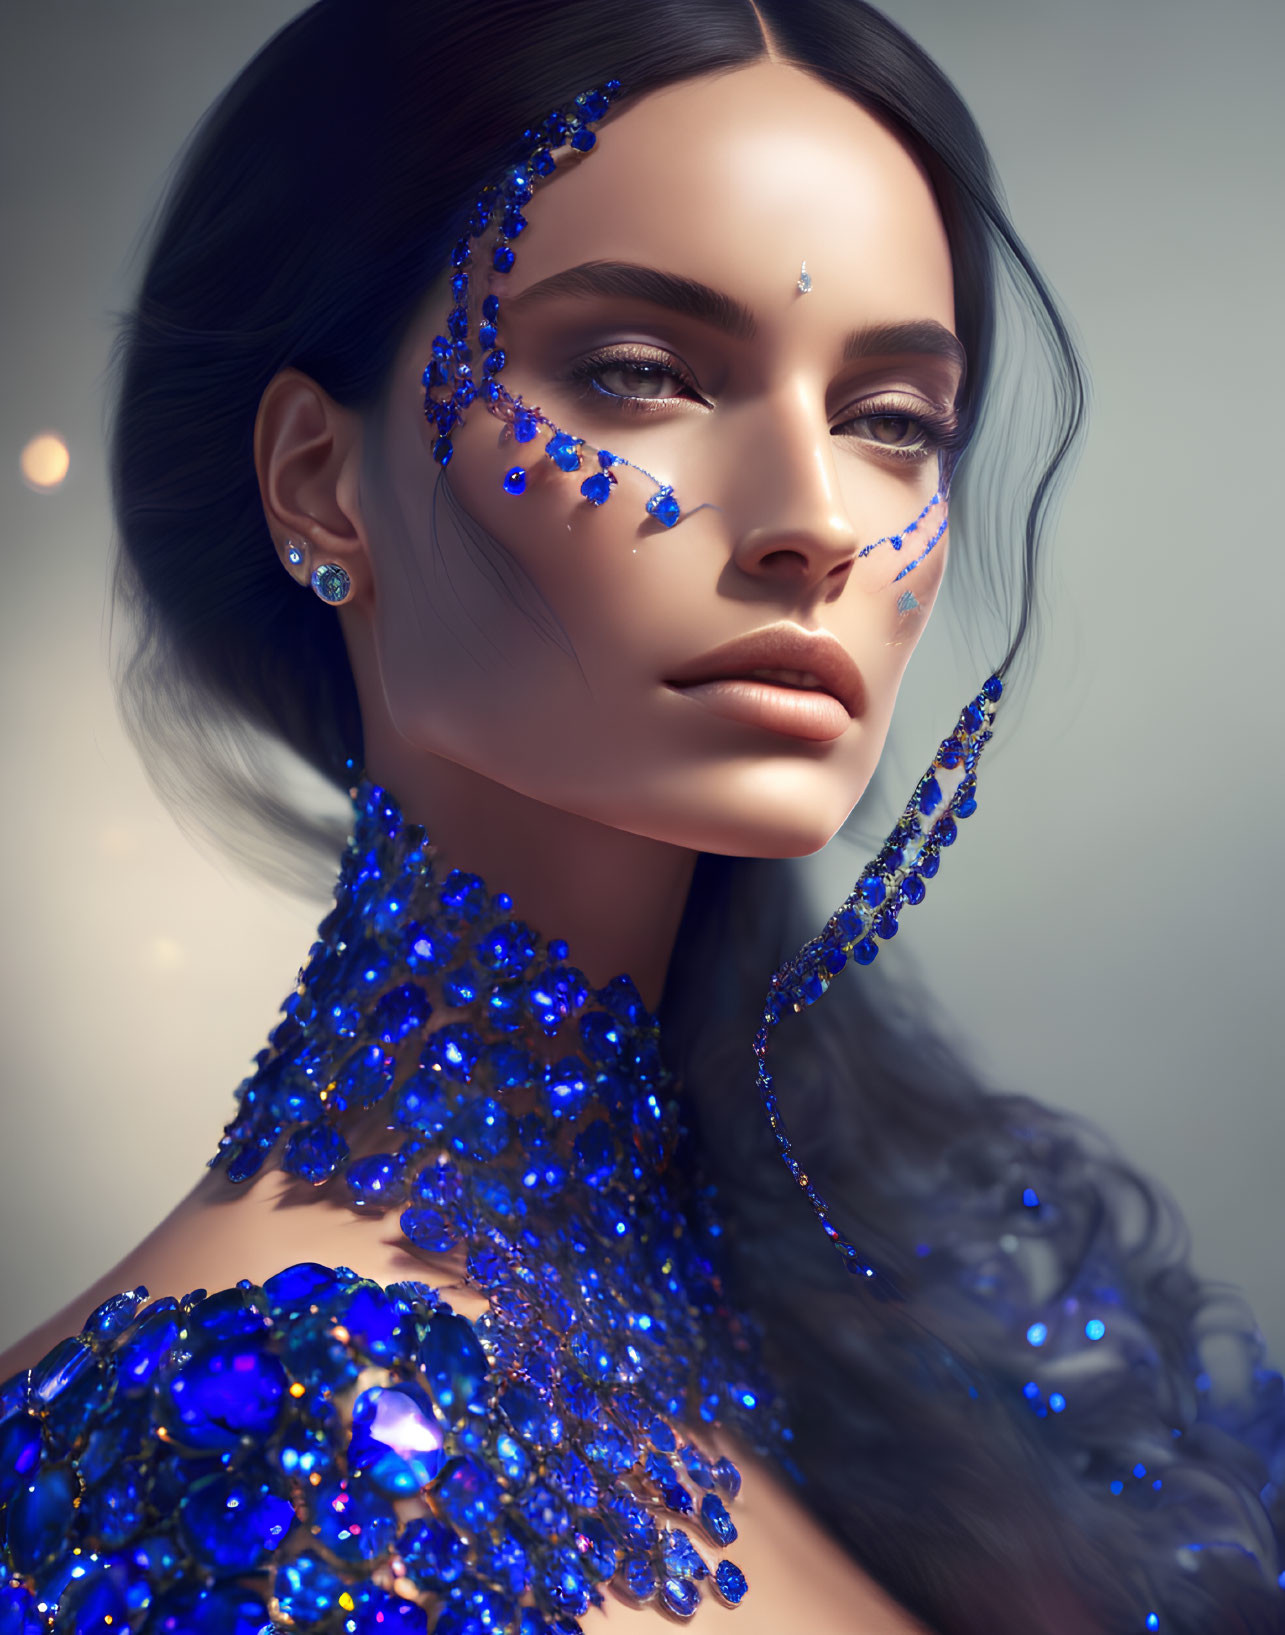 Portrait of woman with blue gemstones, thoughtful expression, and dark hair